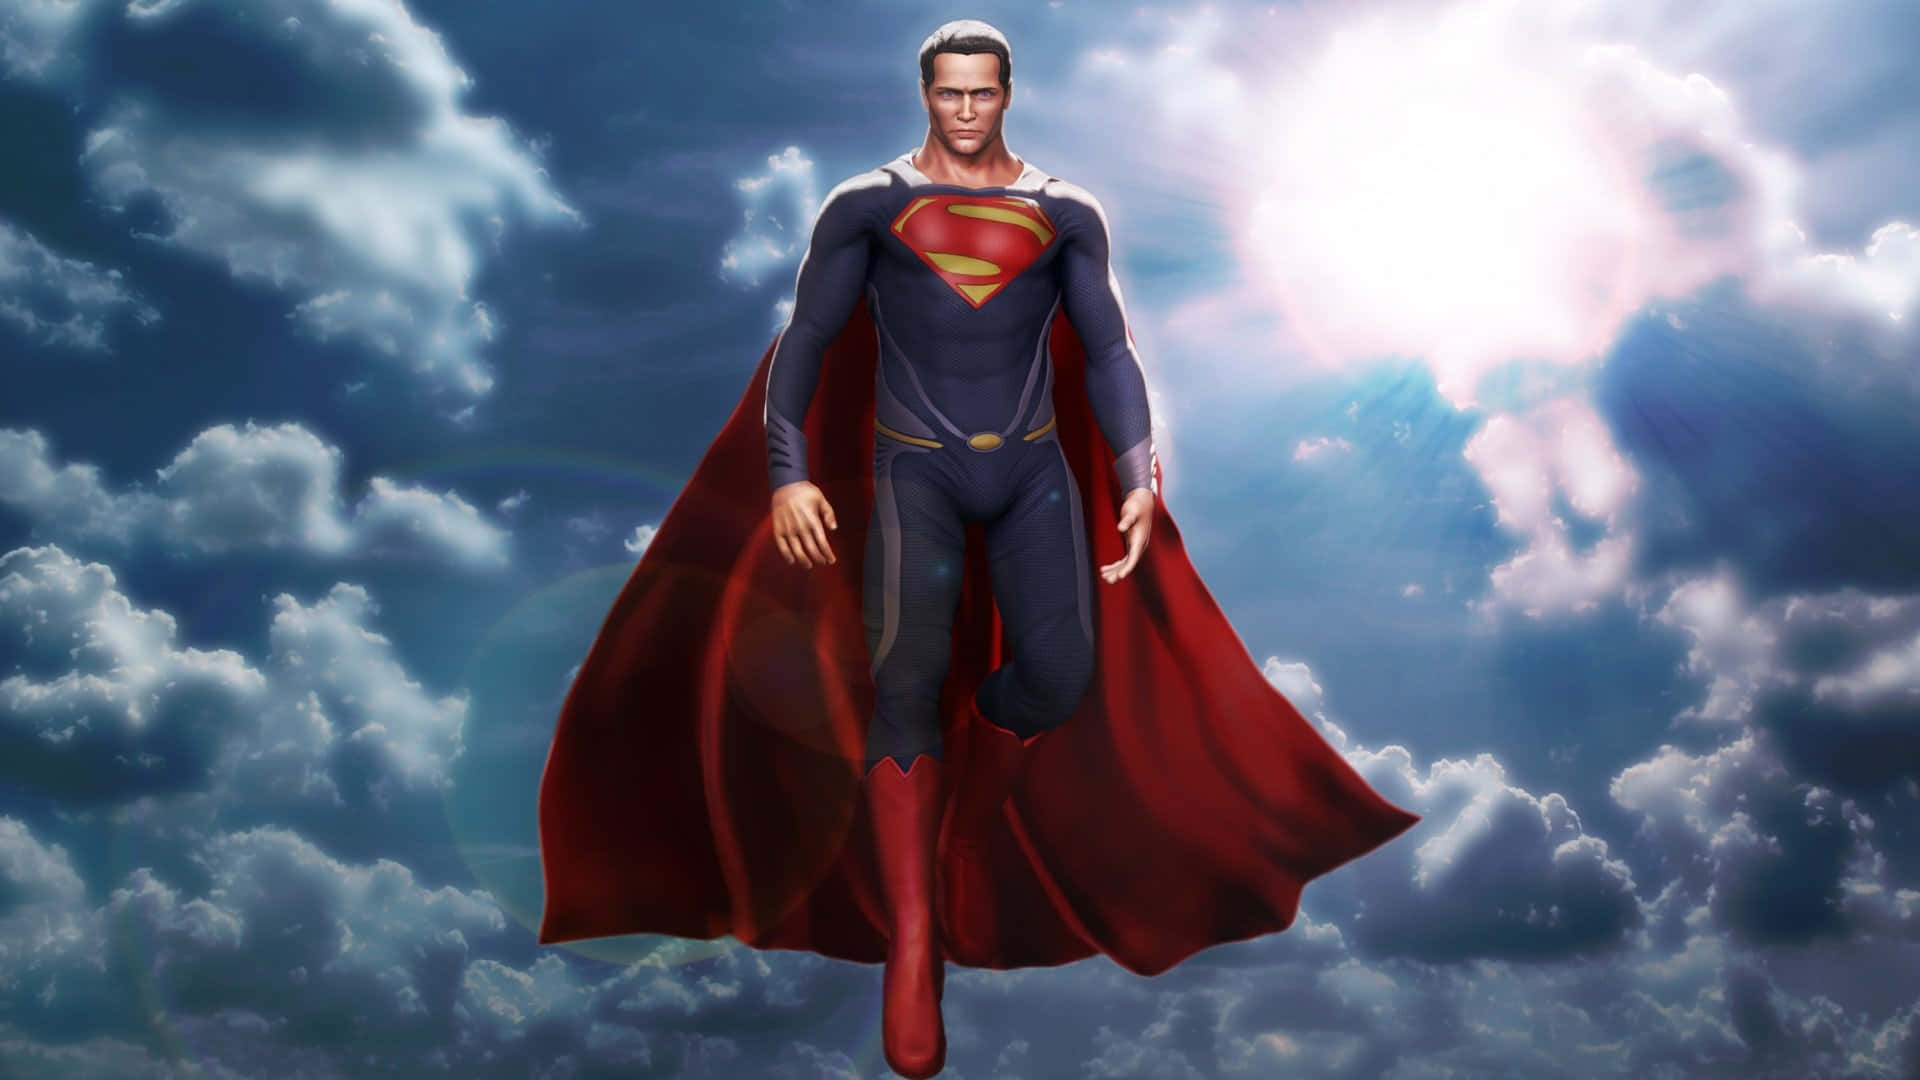 Who cares about Homelander. Who would win? : r/superman